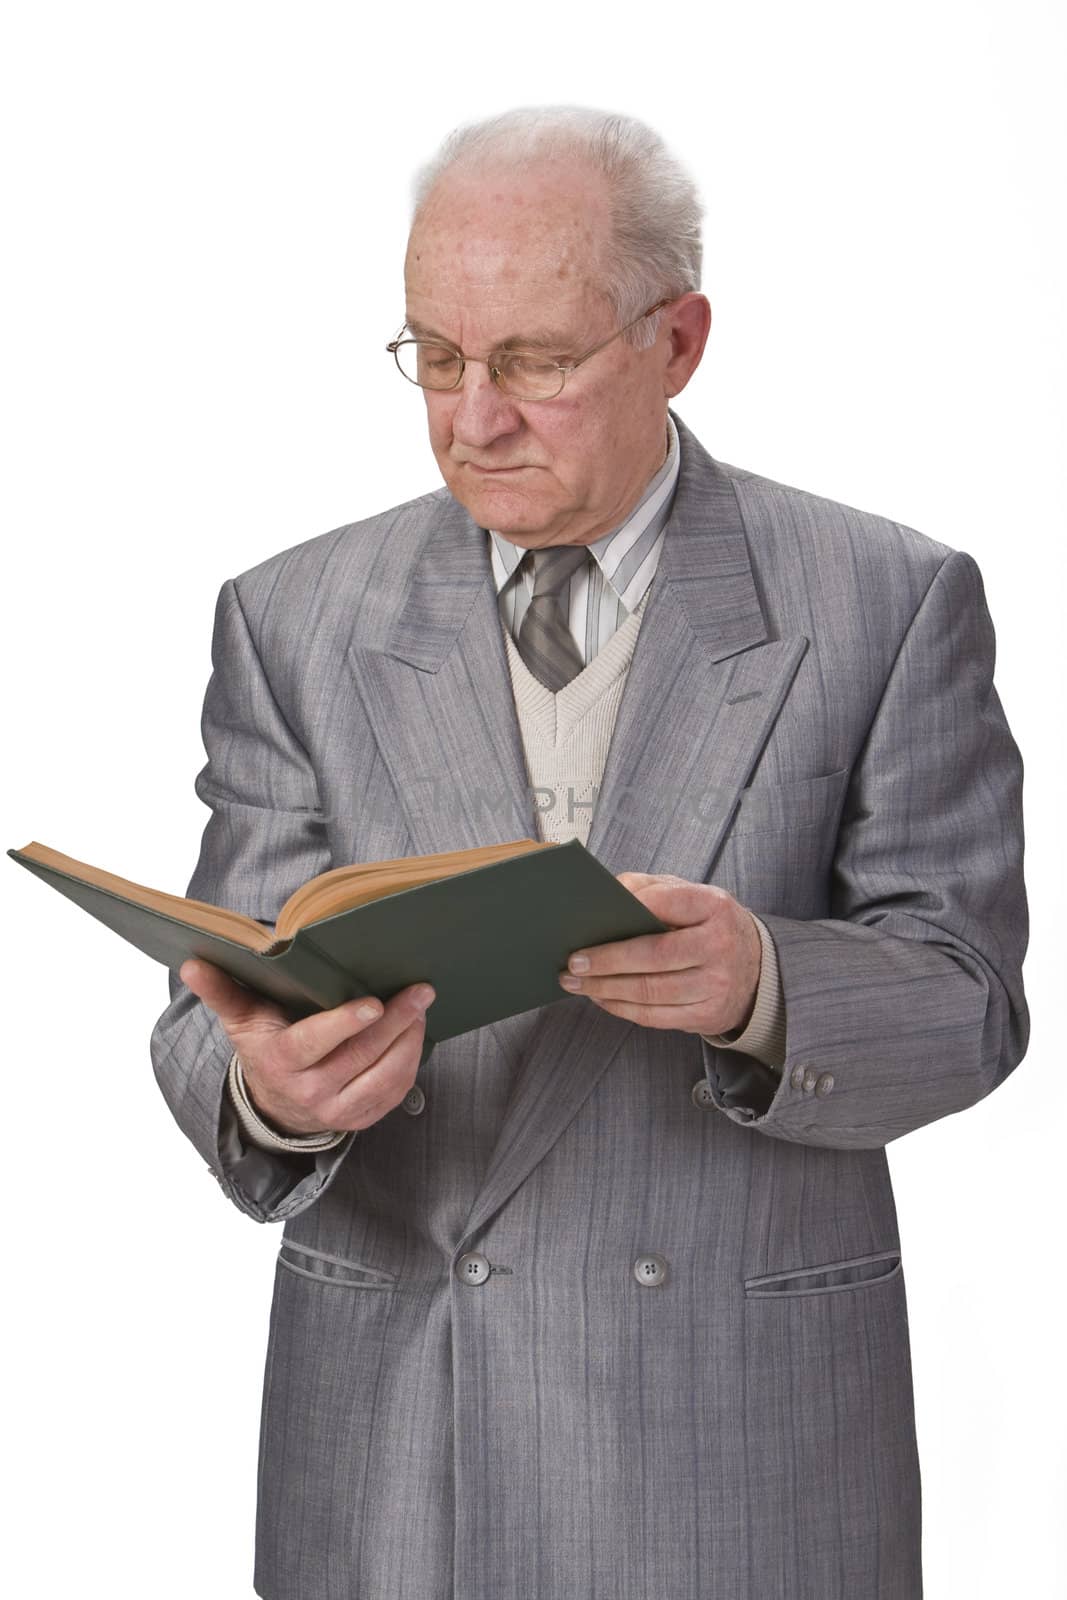 Senior man reading a book against a white background.Shot with Canon 70-200mm f/2.8L IS USM